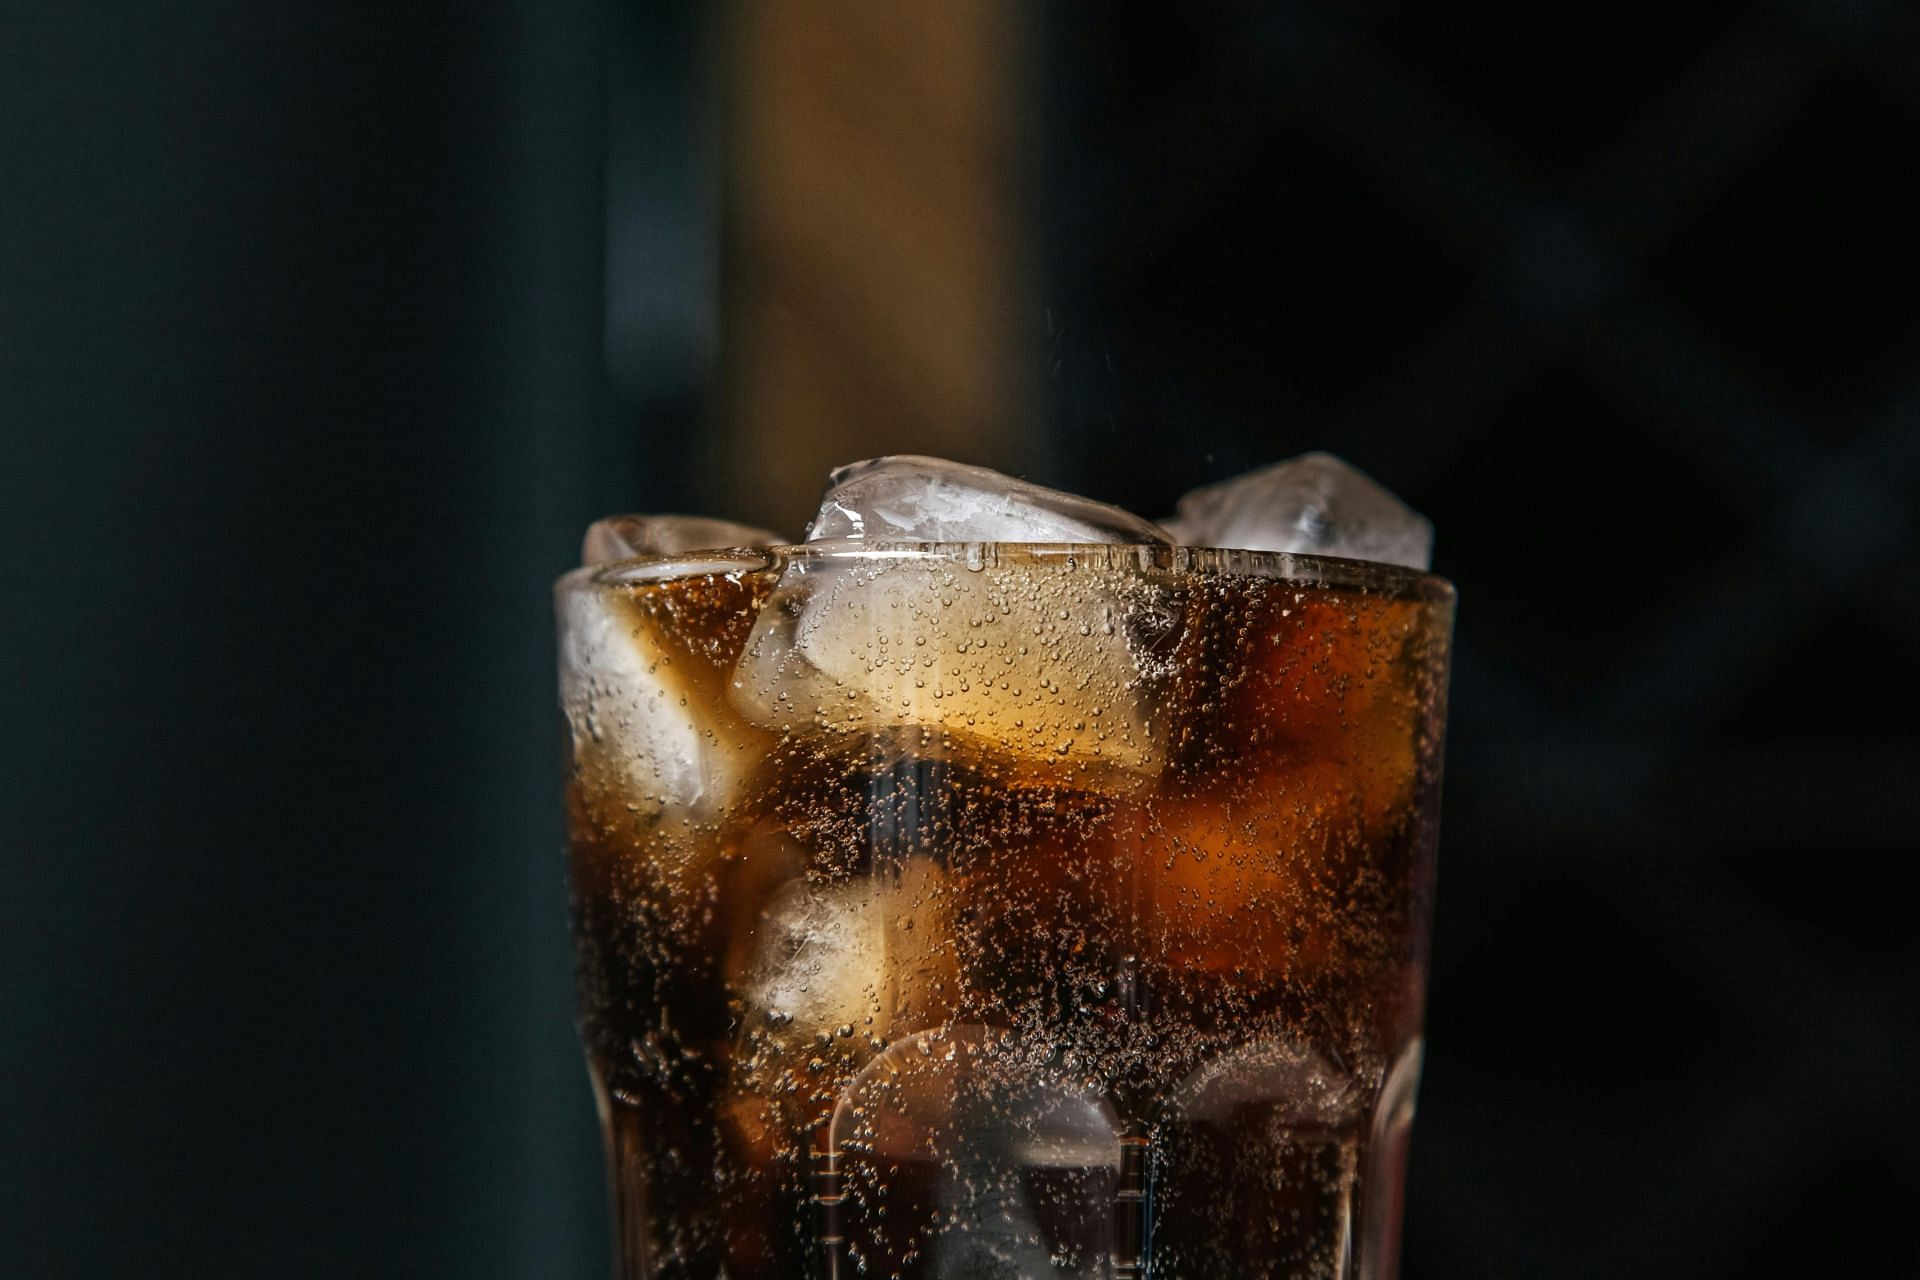 Carbonated drinks may result in burps. (Image via Pexels/ Ron Lach)